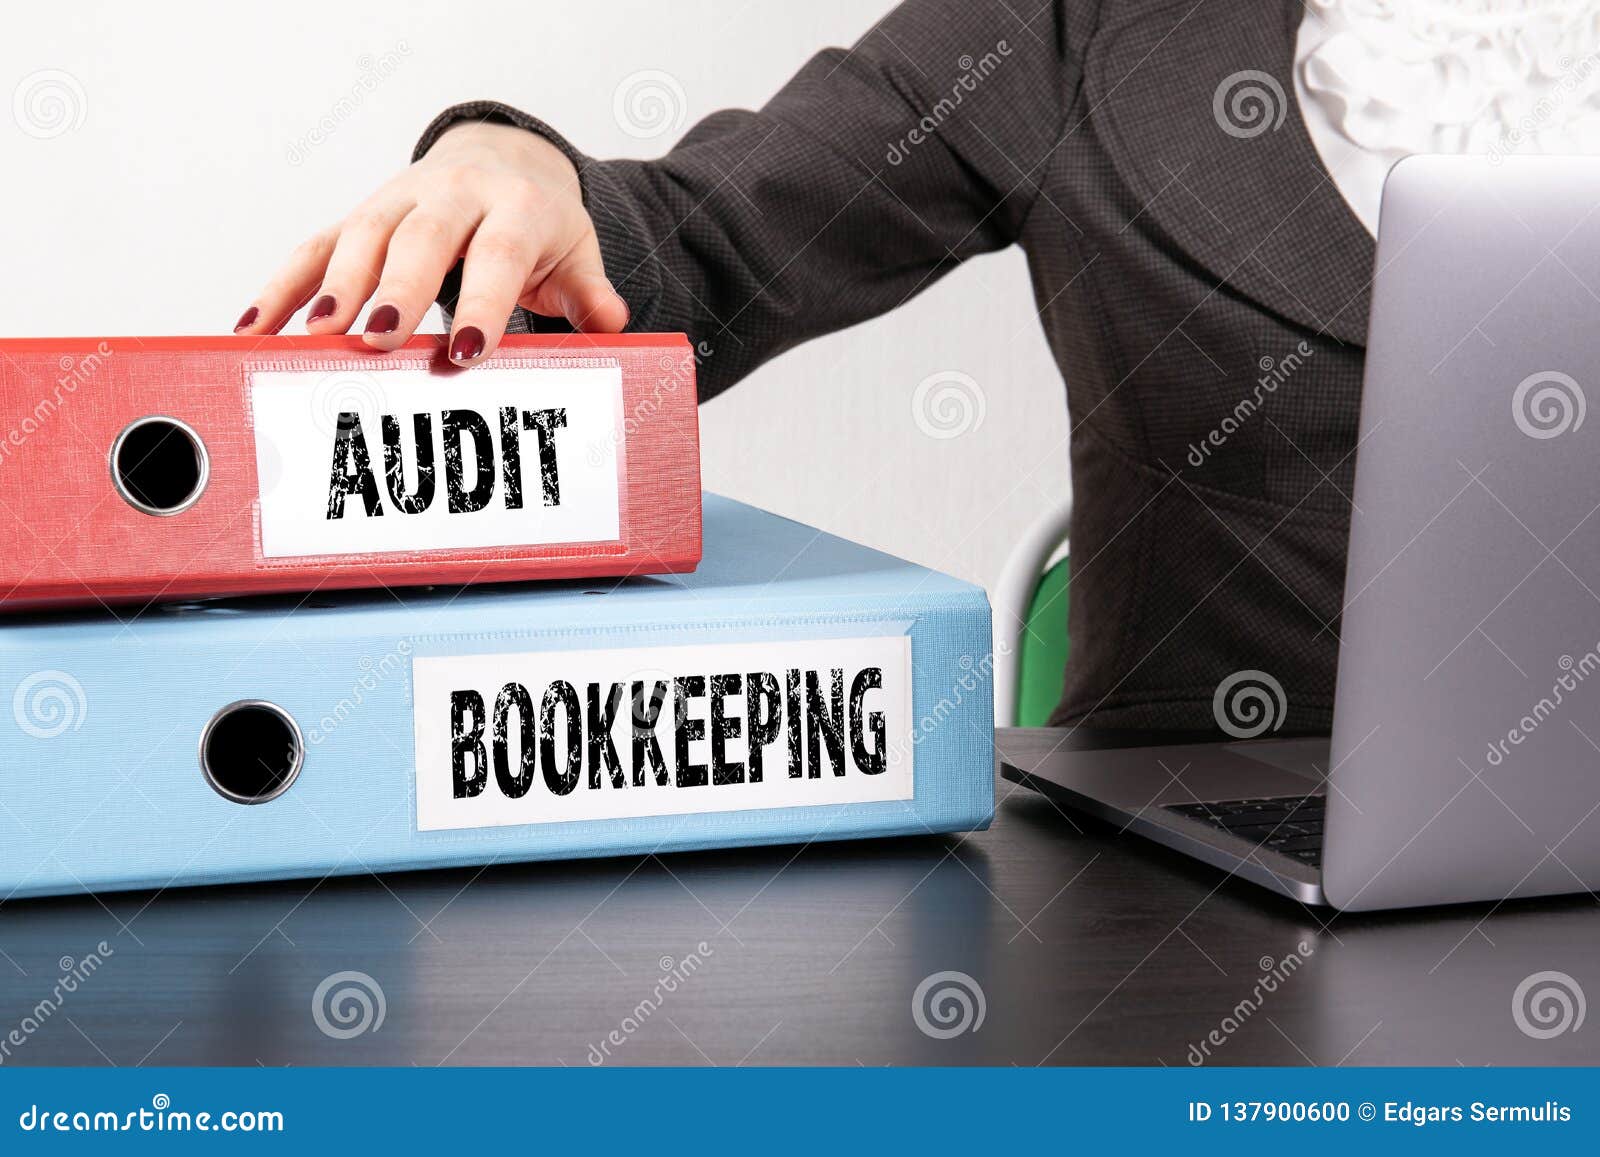 audit and bookkeeping concept